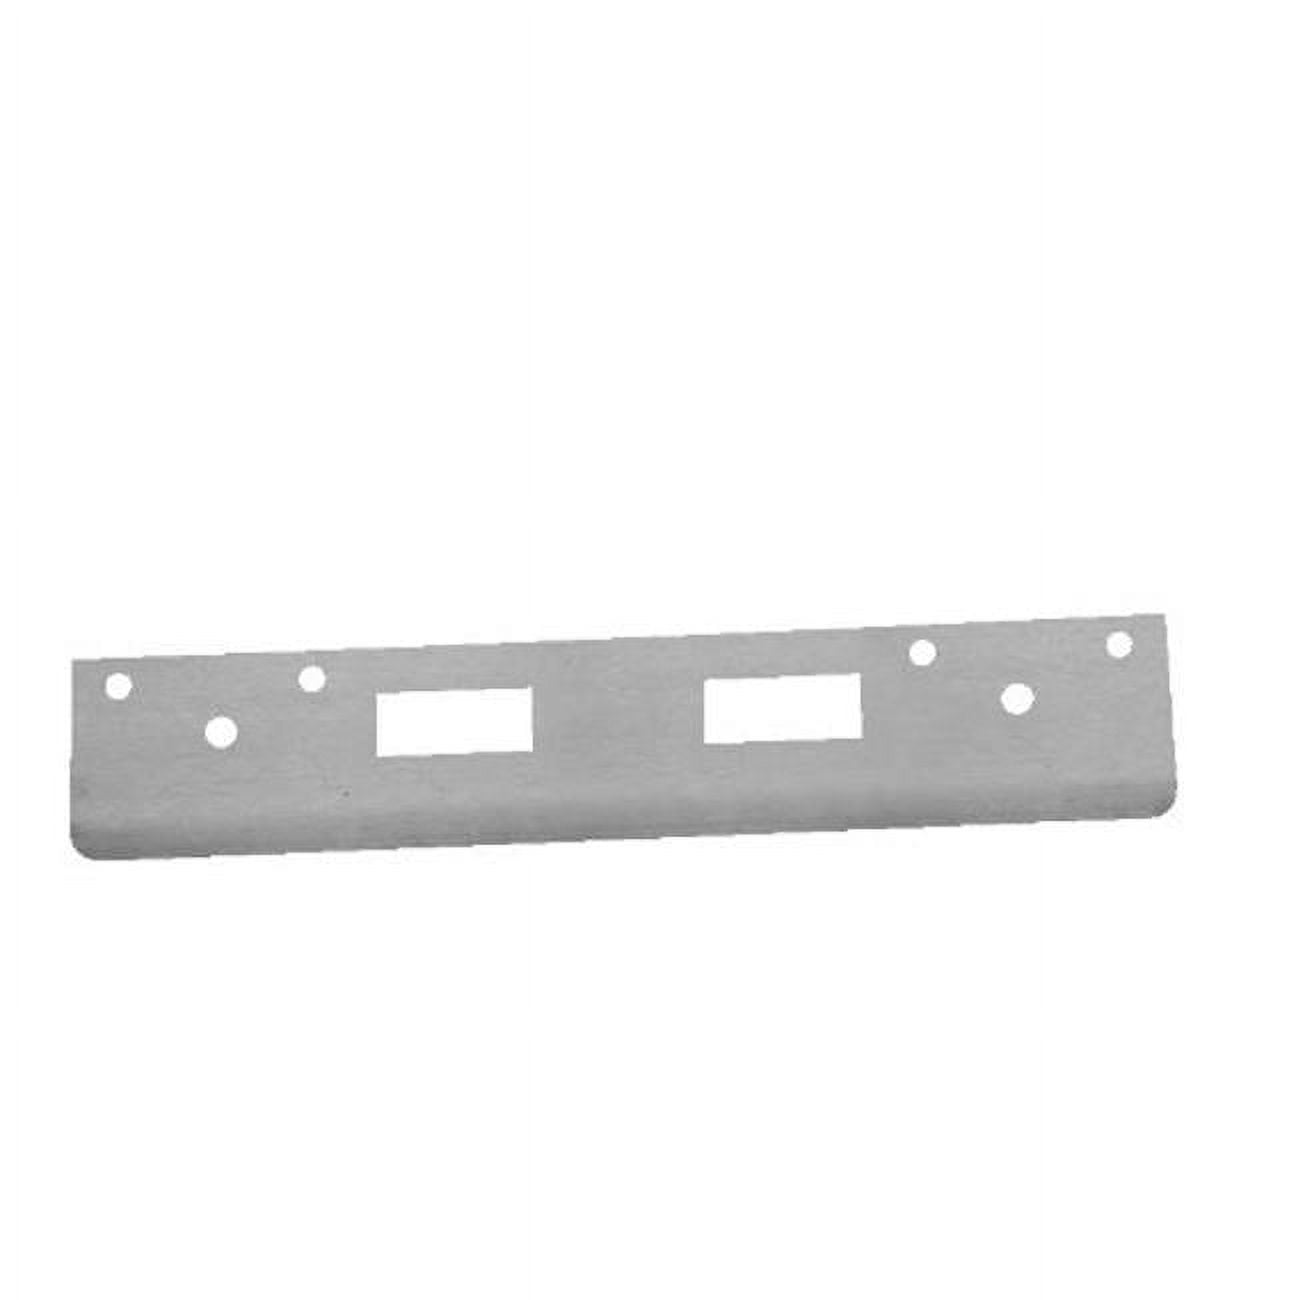 Fl 212n6-sl 12 In. Full Lip High Security Strike With 6 In. Ctc Latch Holes, Silver Coated